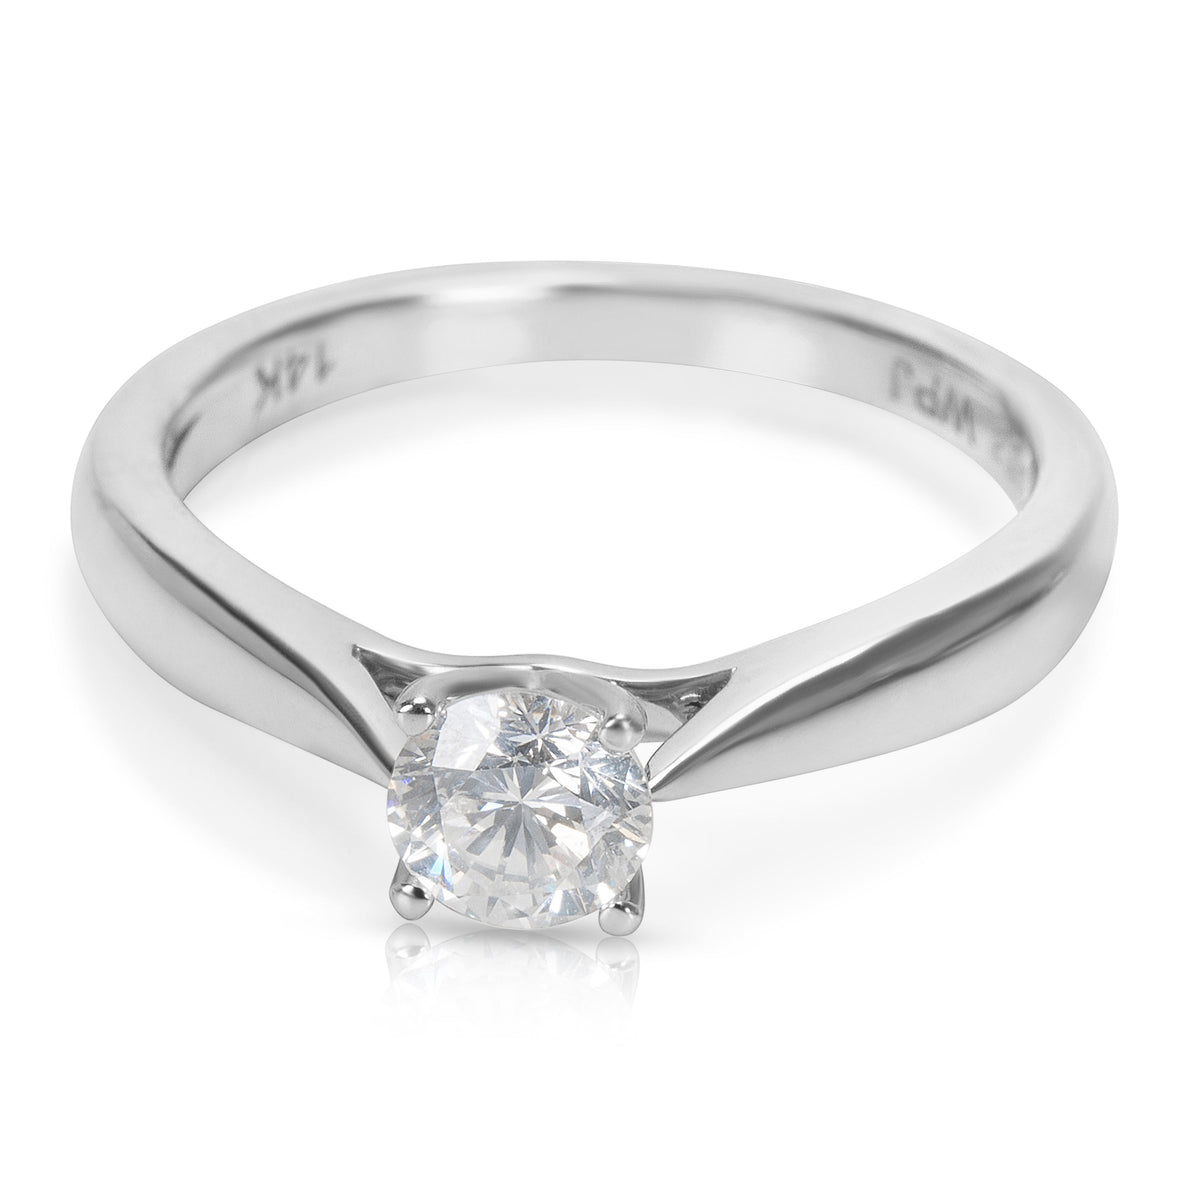 BRAND NEW Soiltaire Engagement Ring in 14K White Gold with Diamonds (0.42 CTW)